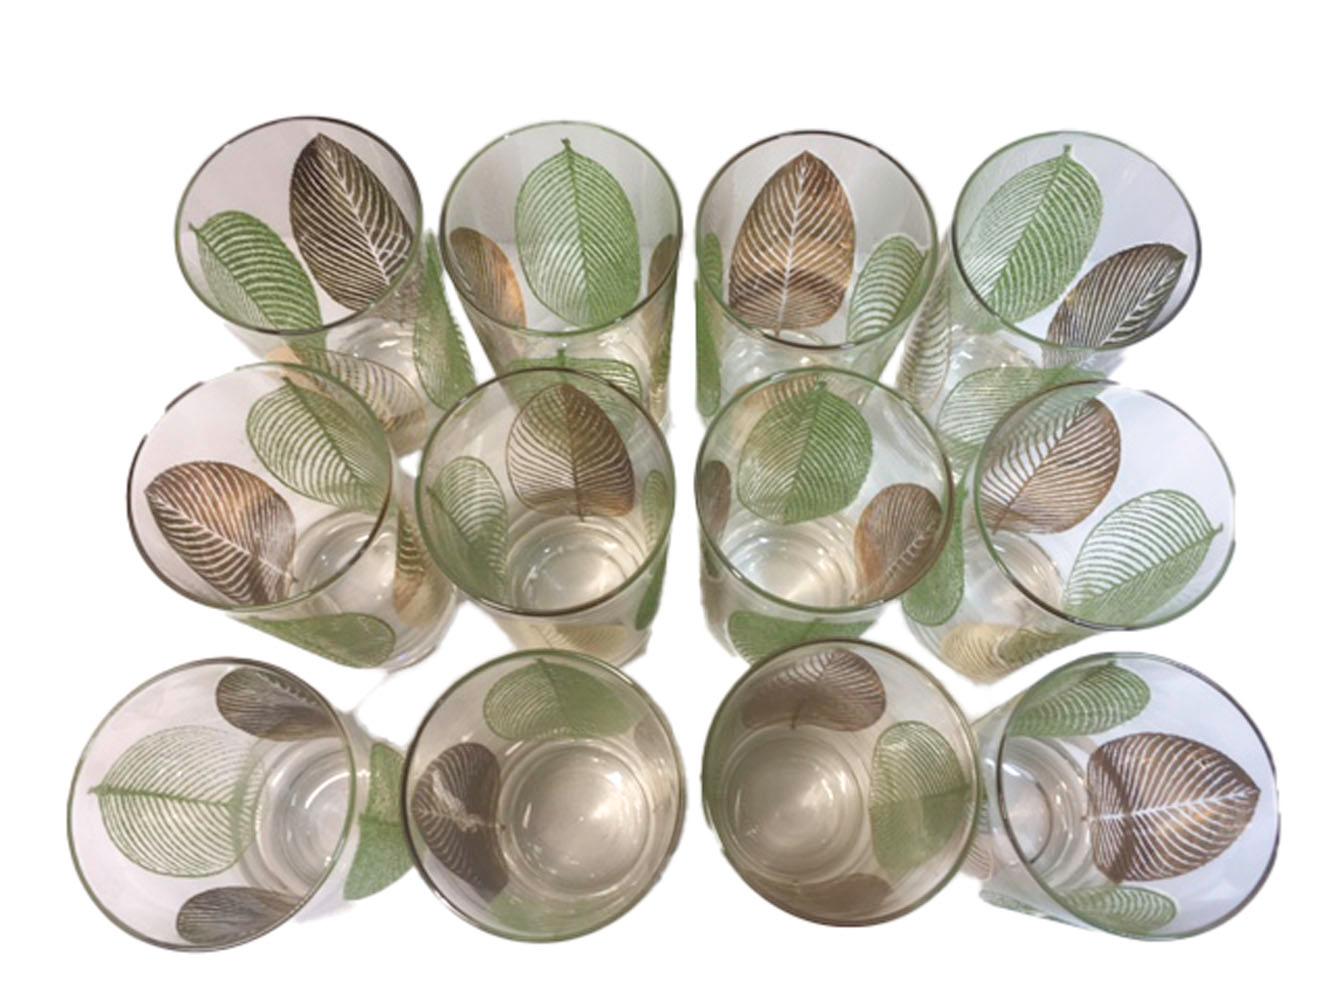 Rare set of 12 highball glasses, each with 4 leaves alternating 22k gold and green enamel. The leaves have a raised 